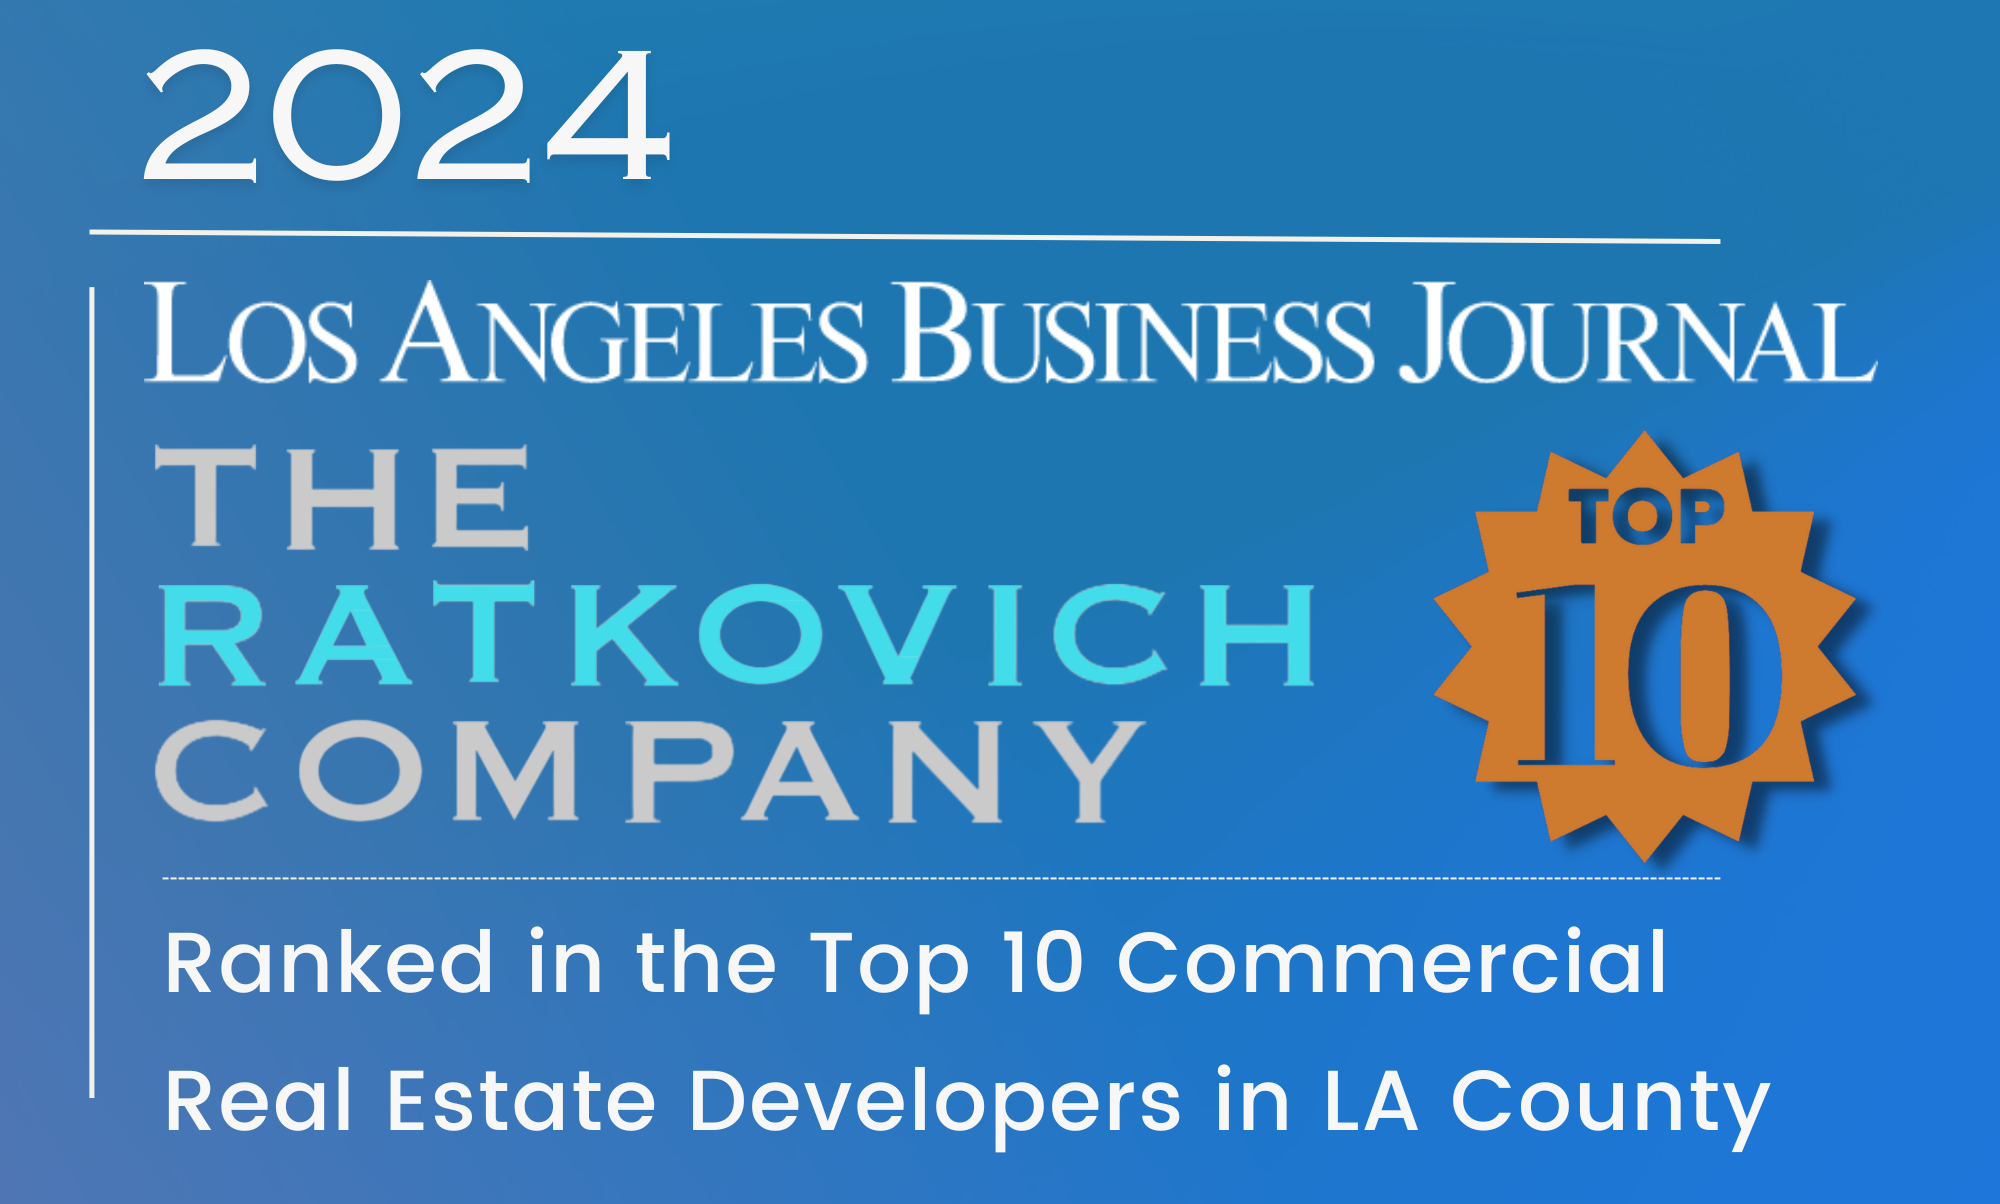 Congrats to the entire team and our partners for making LABJ’s Top 10 list for 2023!